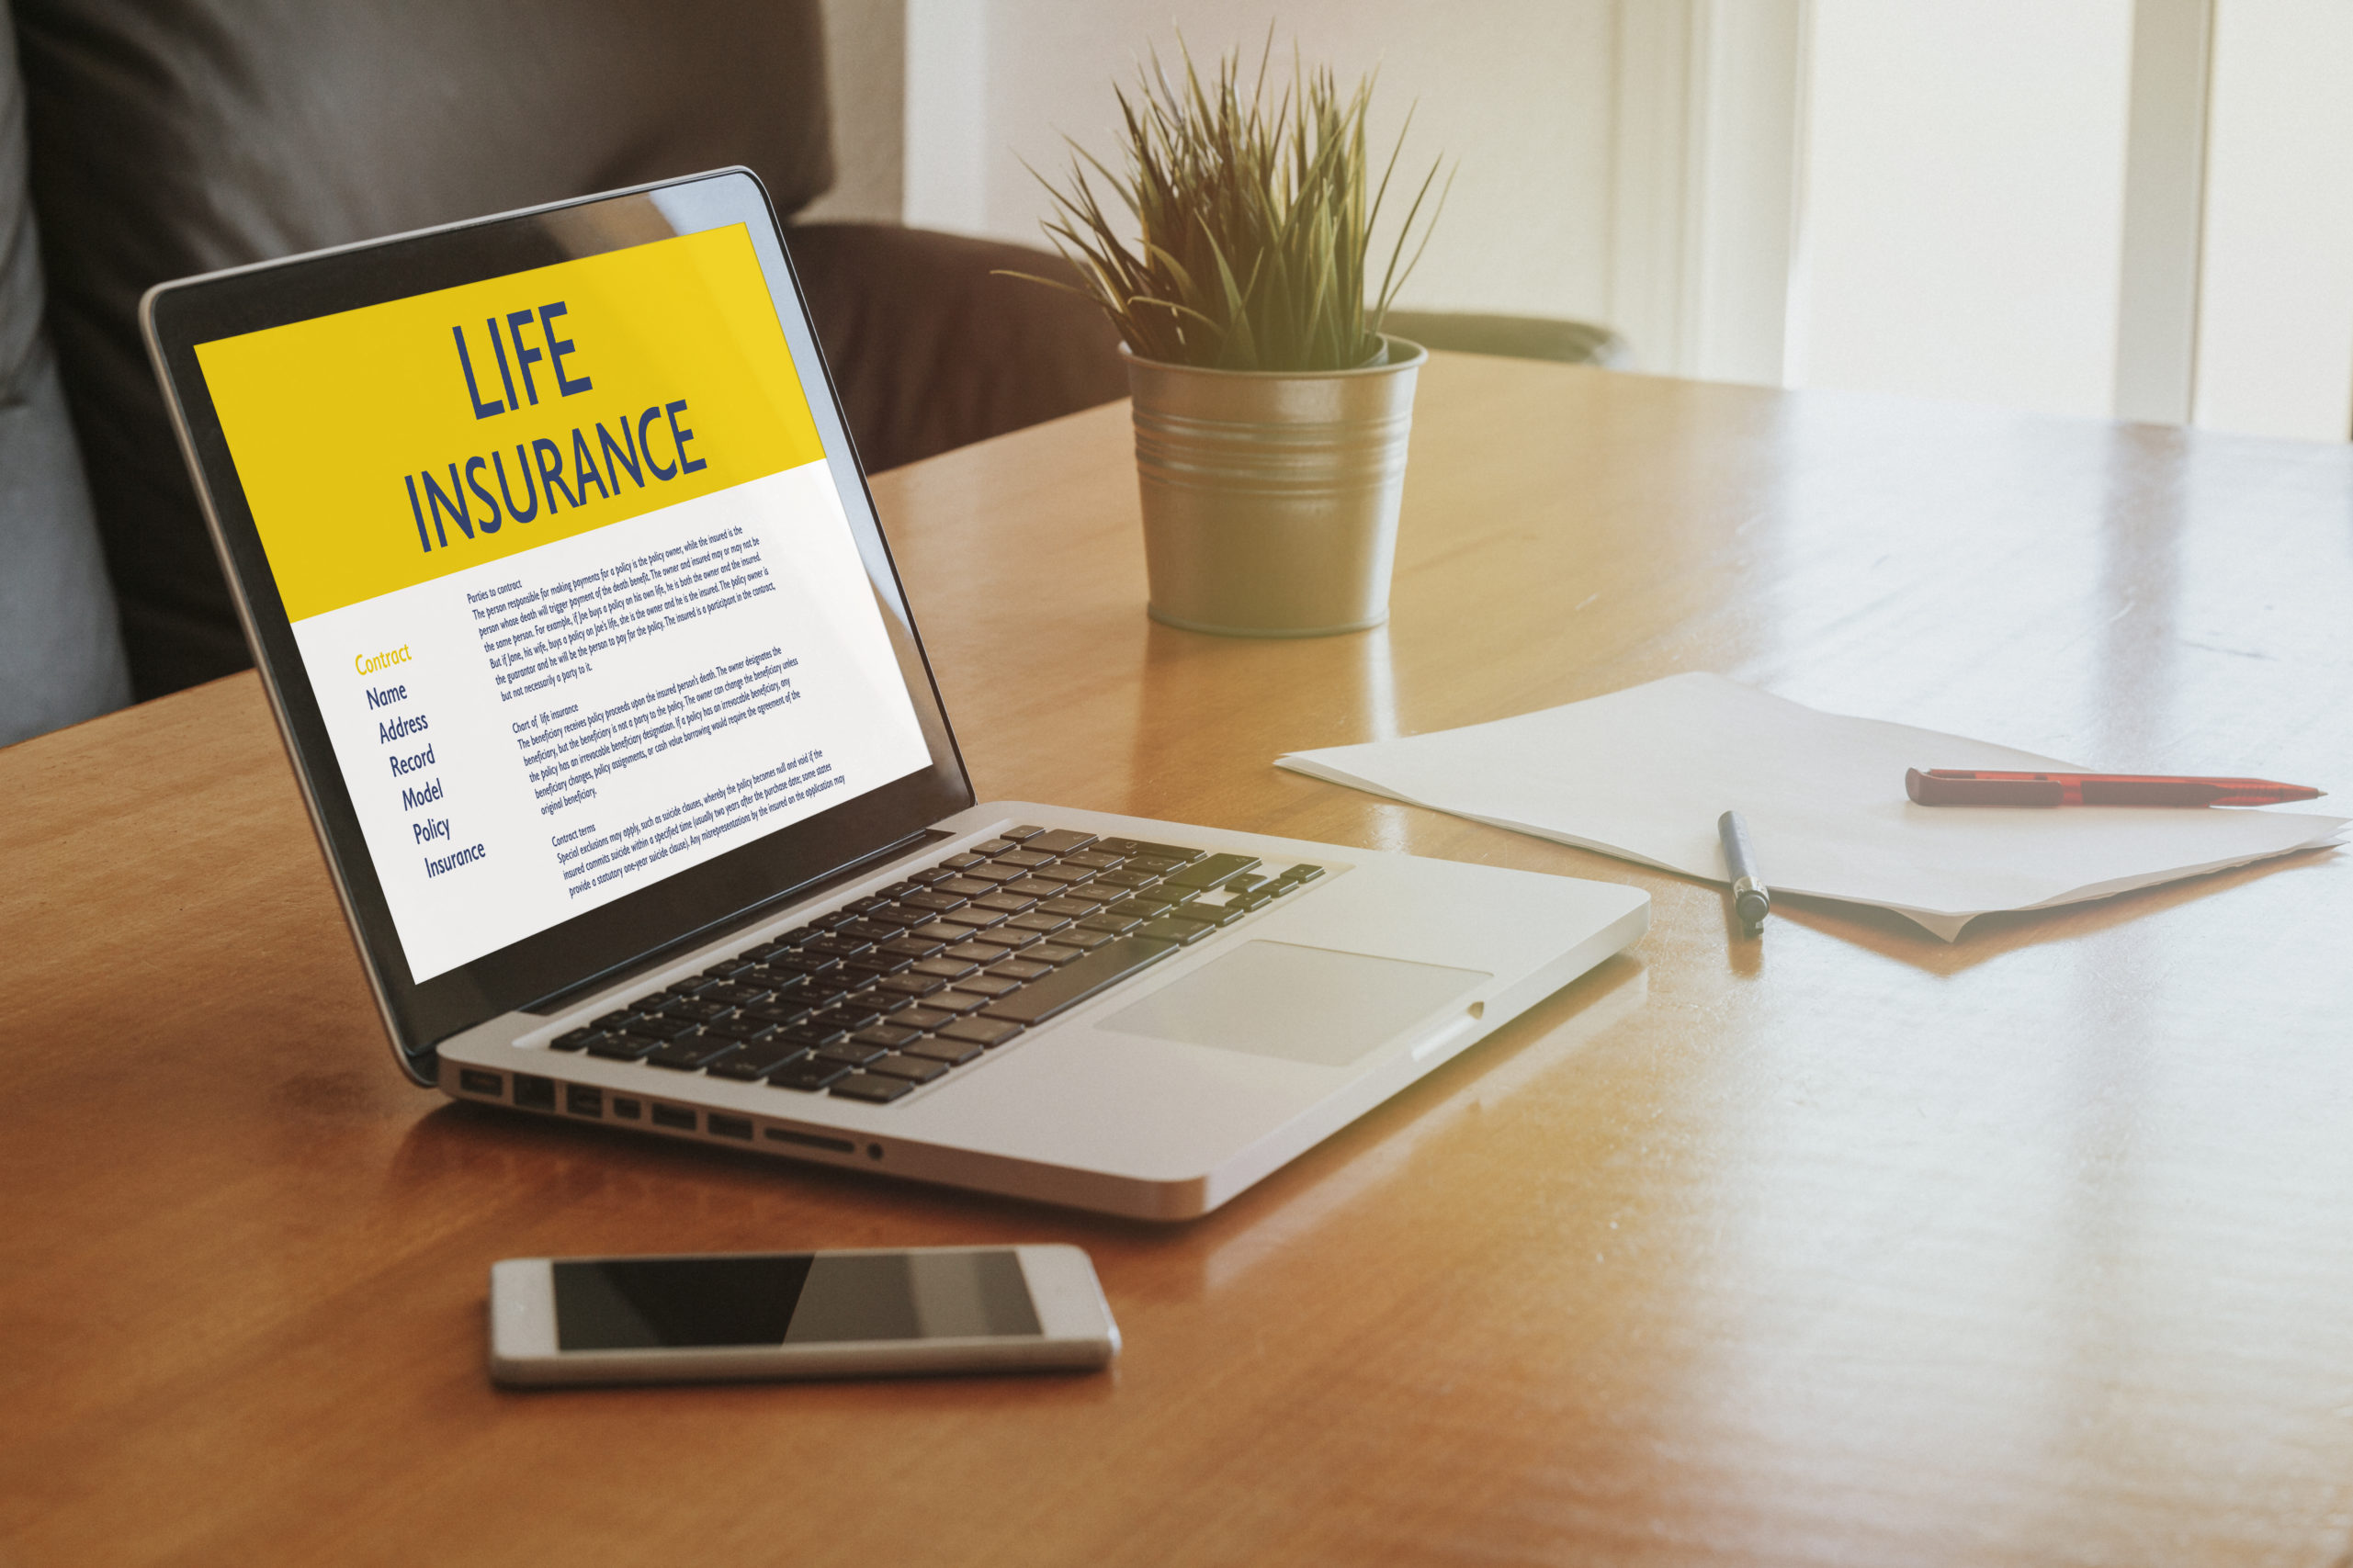 Laptop displaying various life insurance policy options on its screen.